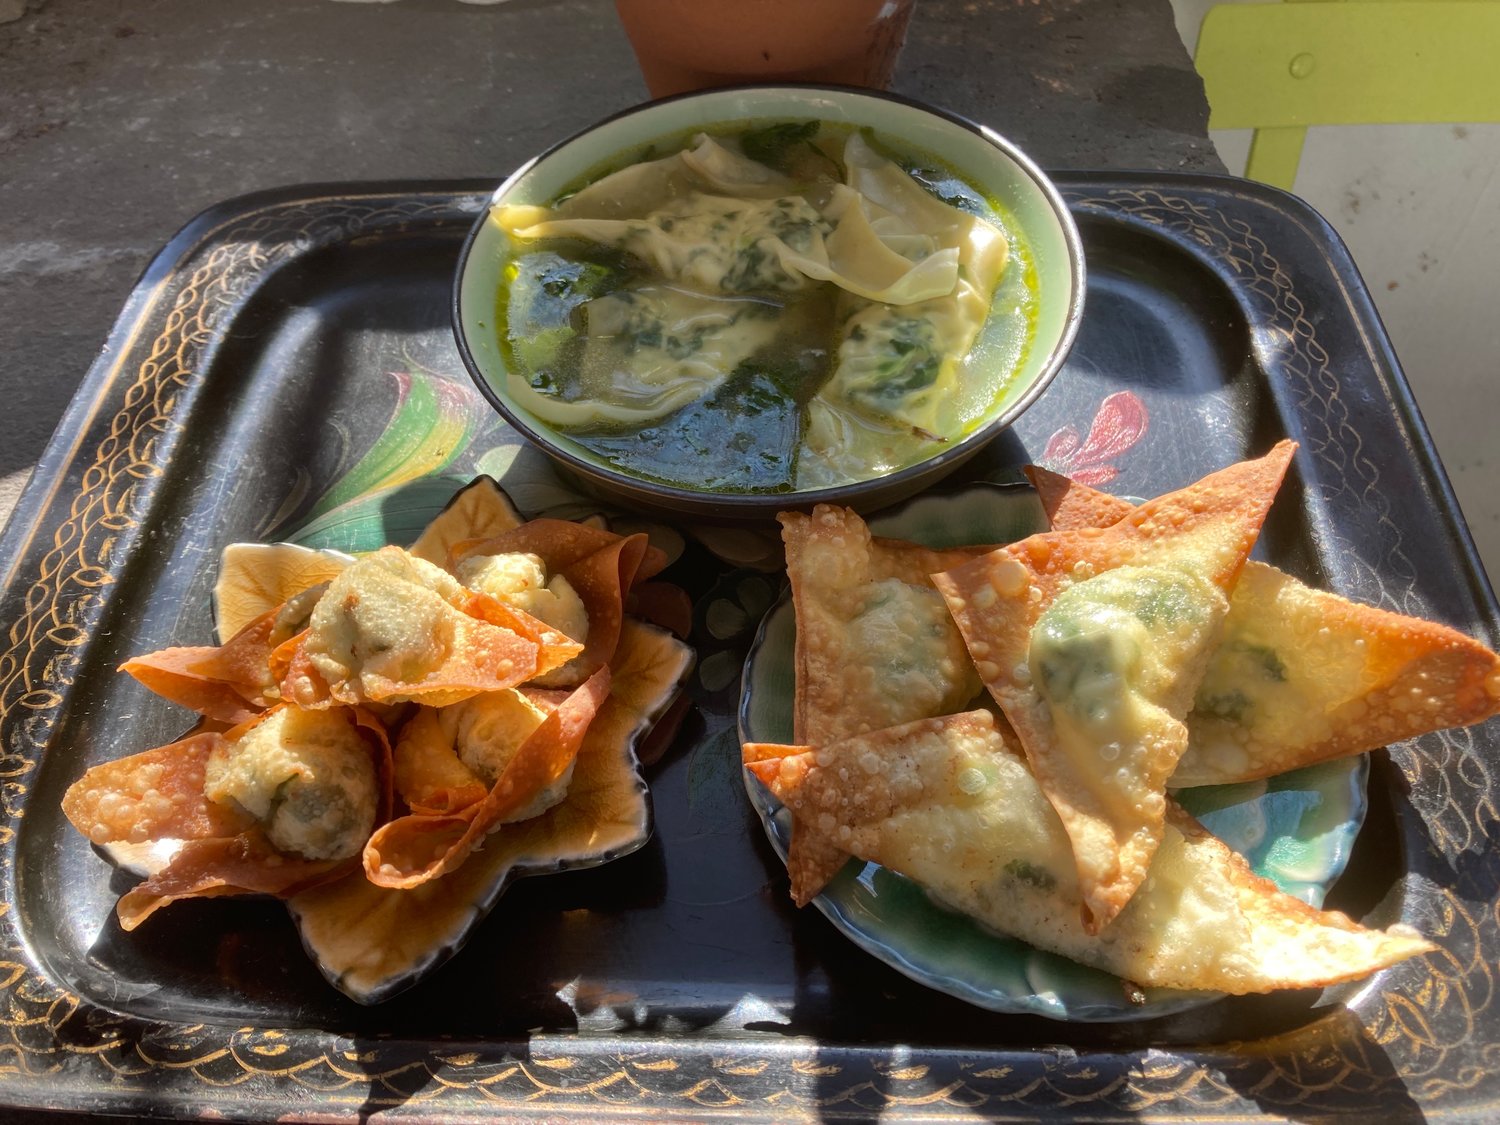 Poached and fried kreplach – similar to dumplings, wontons and pierogies – stuffed with spinach, ricotta and scallions.